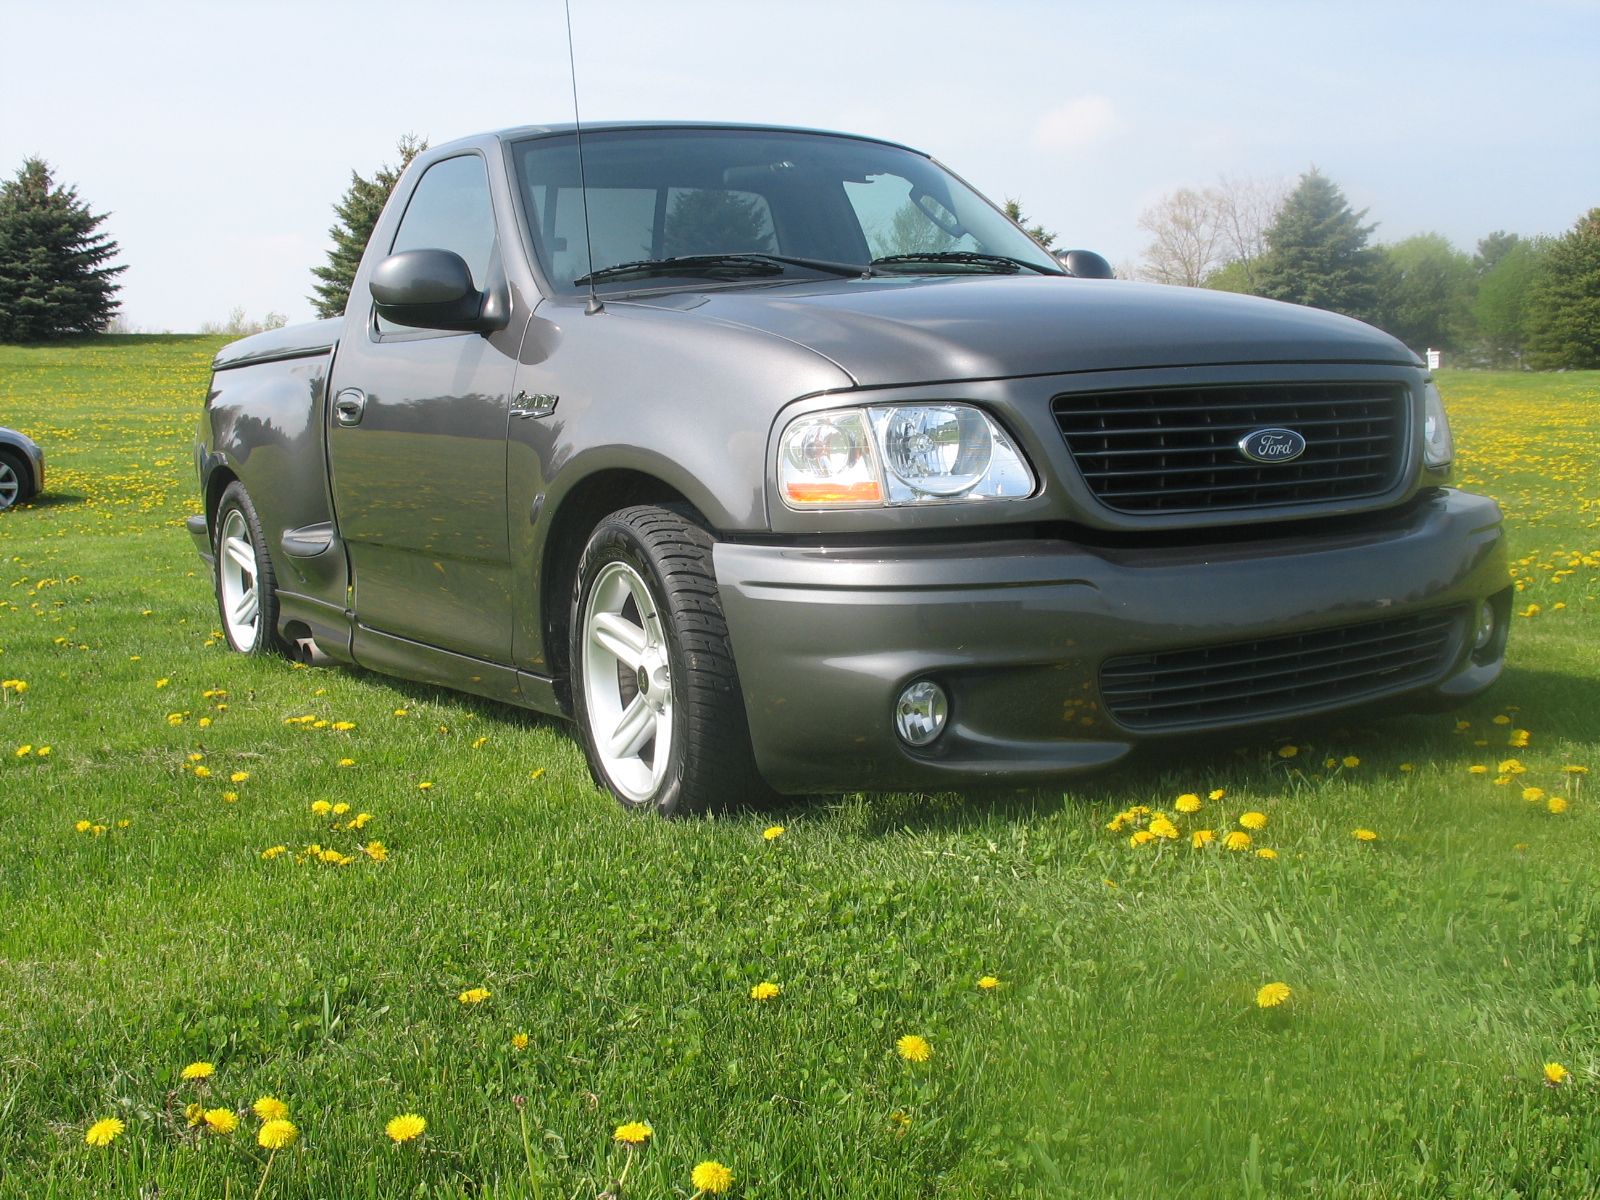 Ford Lightning 1999: Review, Amazing Pictures and Images – Look at ...